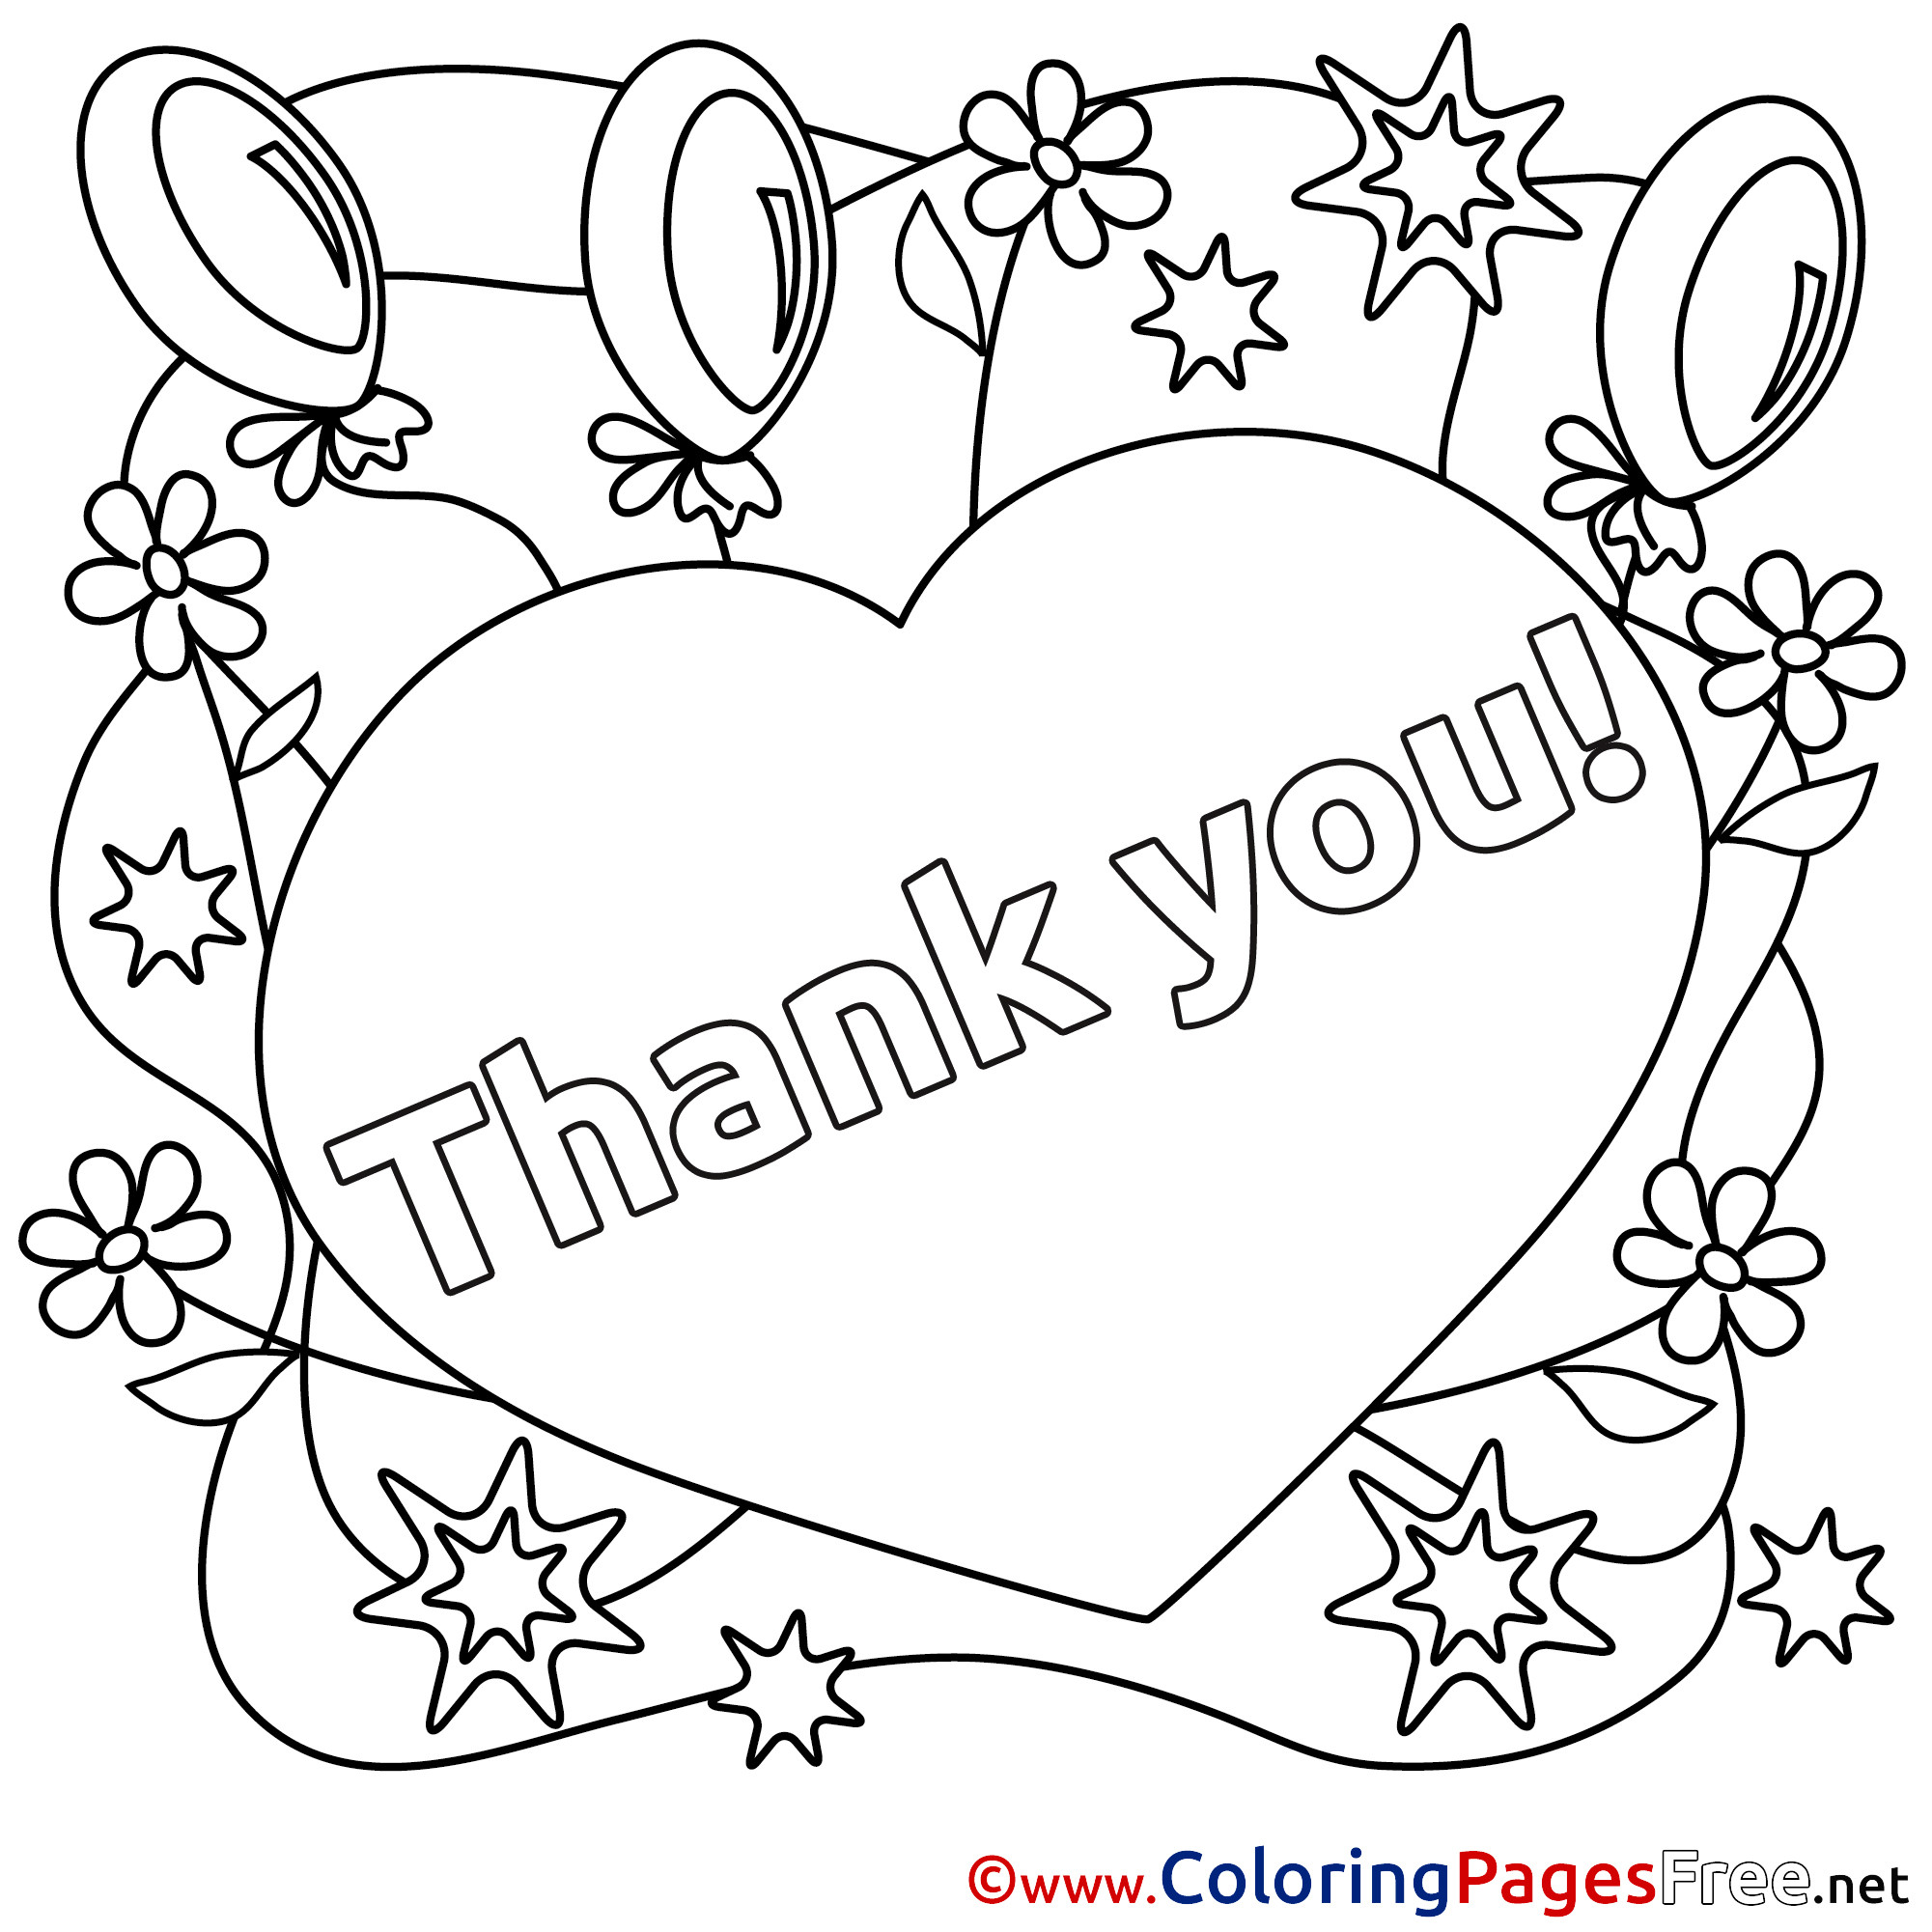 Thank You Coloring Pages For Kids
 Heart Balloons for Kids Thank You Colouring Page